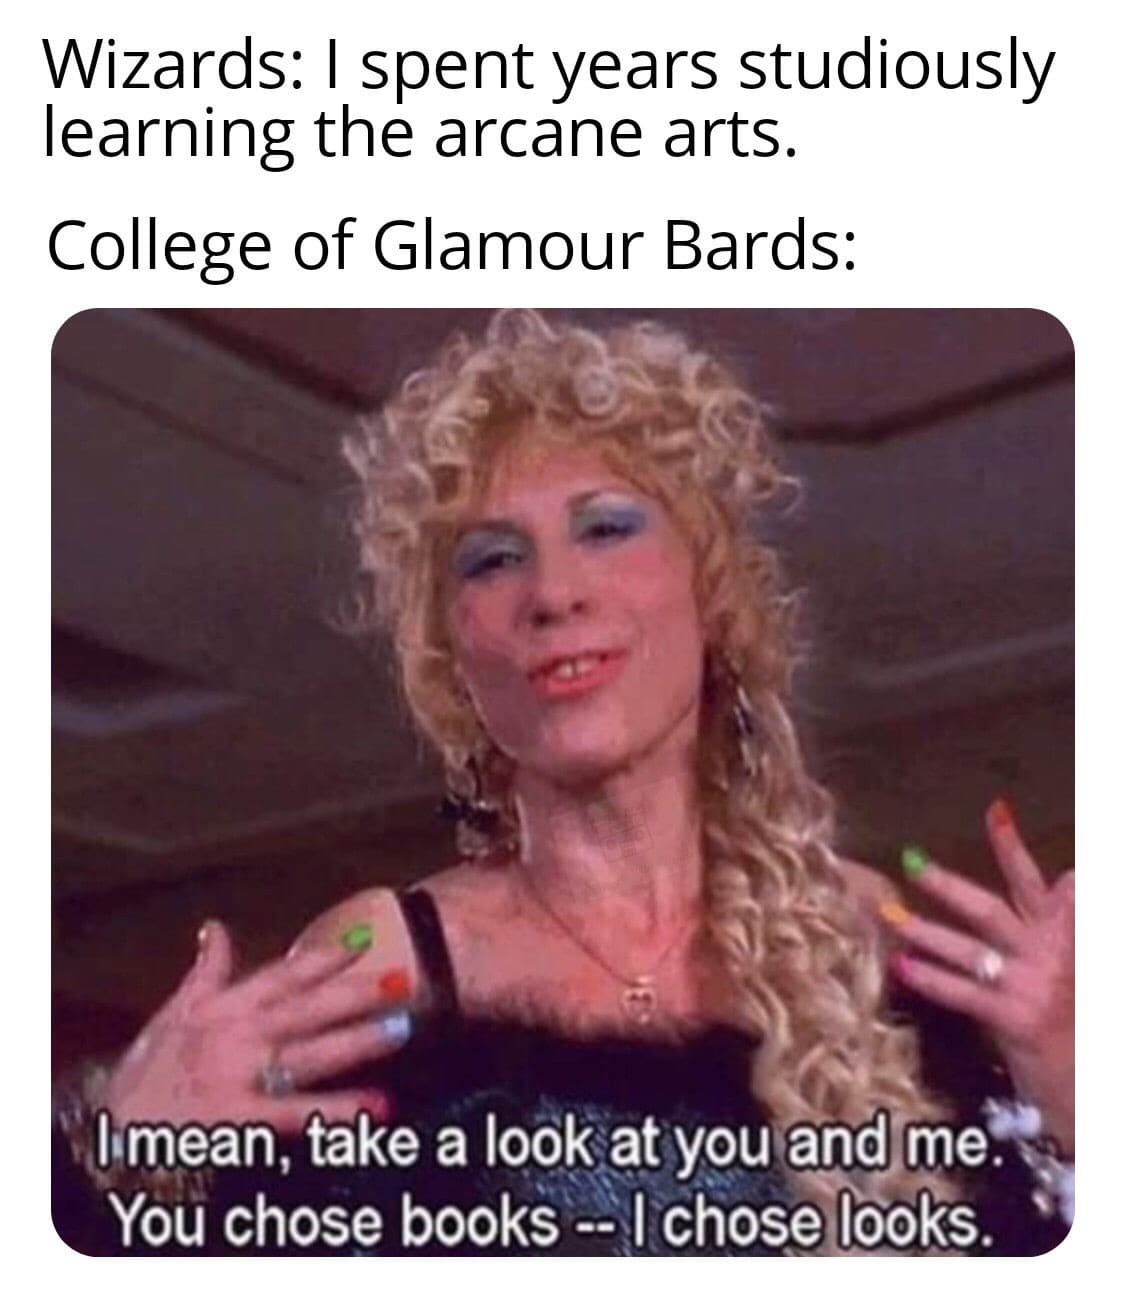 d&d memes - Wizards I spent years studiously learning the arcane arts. College of Glamour Bards I mean, take a look at you and me. You chose books I chose looks.